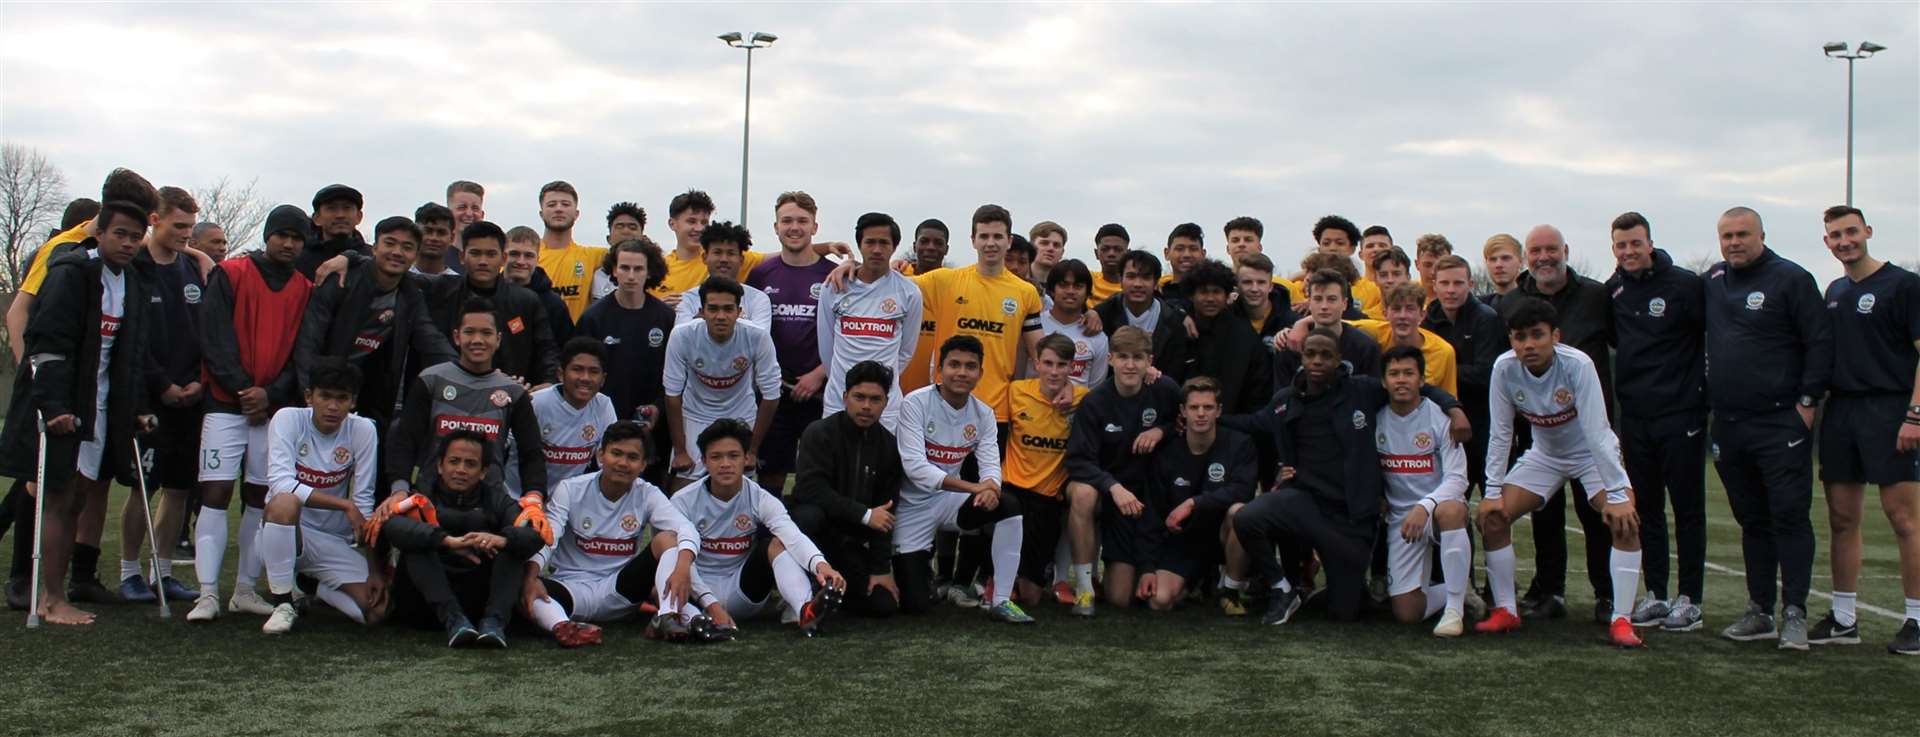 Dover Athletic Football Academy - a partnership with Faversham's Abbey School - play against the Indonesia U17 side in a friendly at the Abbey School